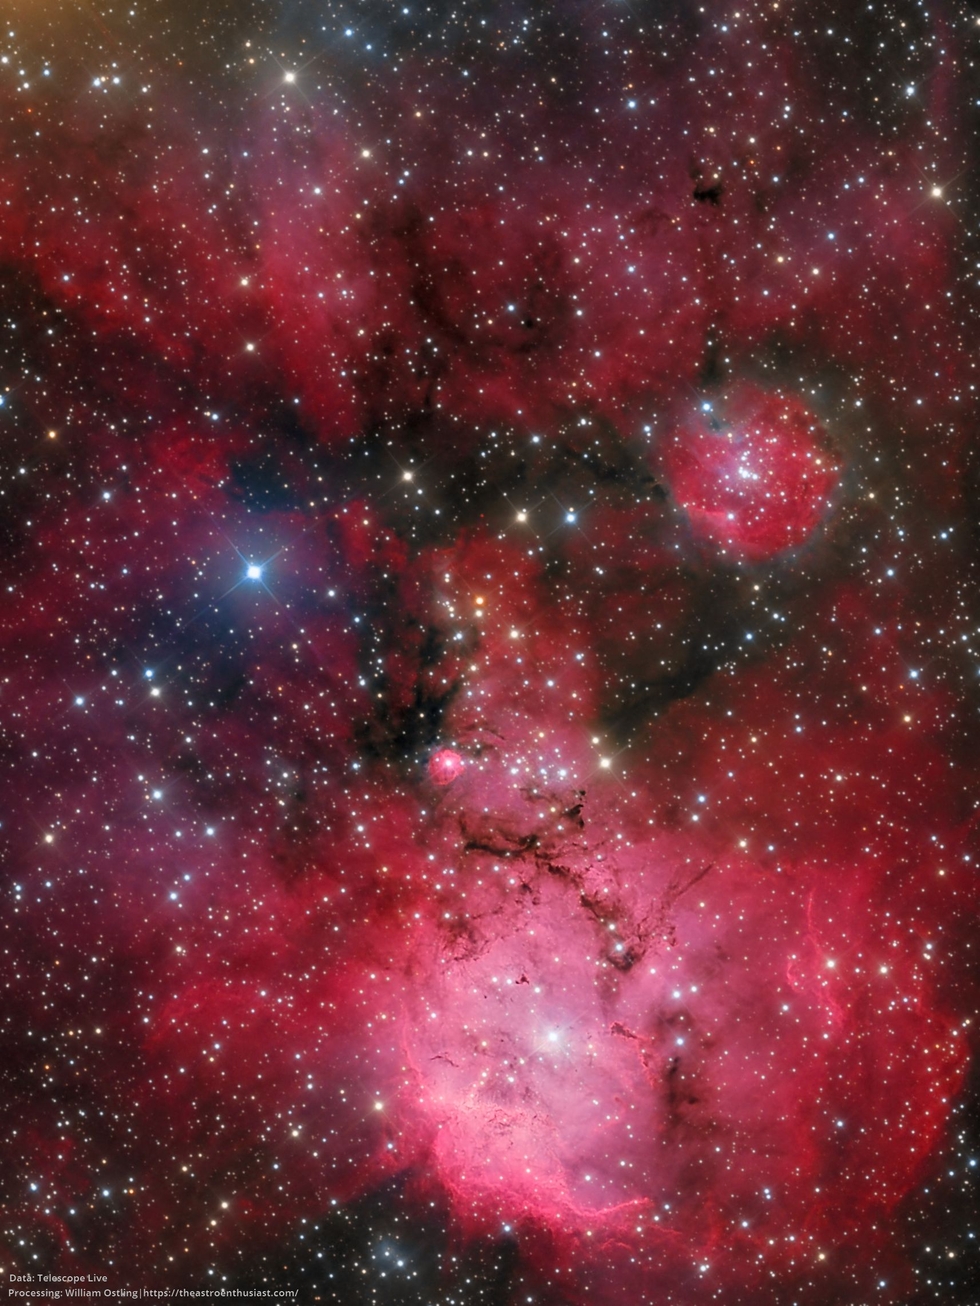 Reflection and emission in SH2-311: The skull and crossbones nebula